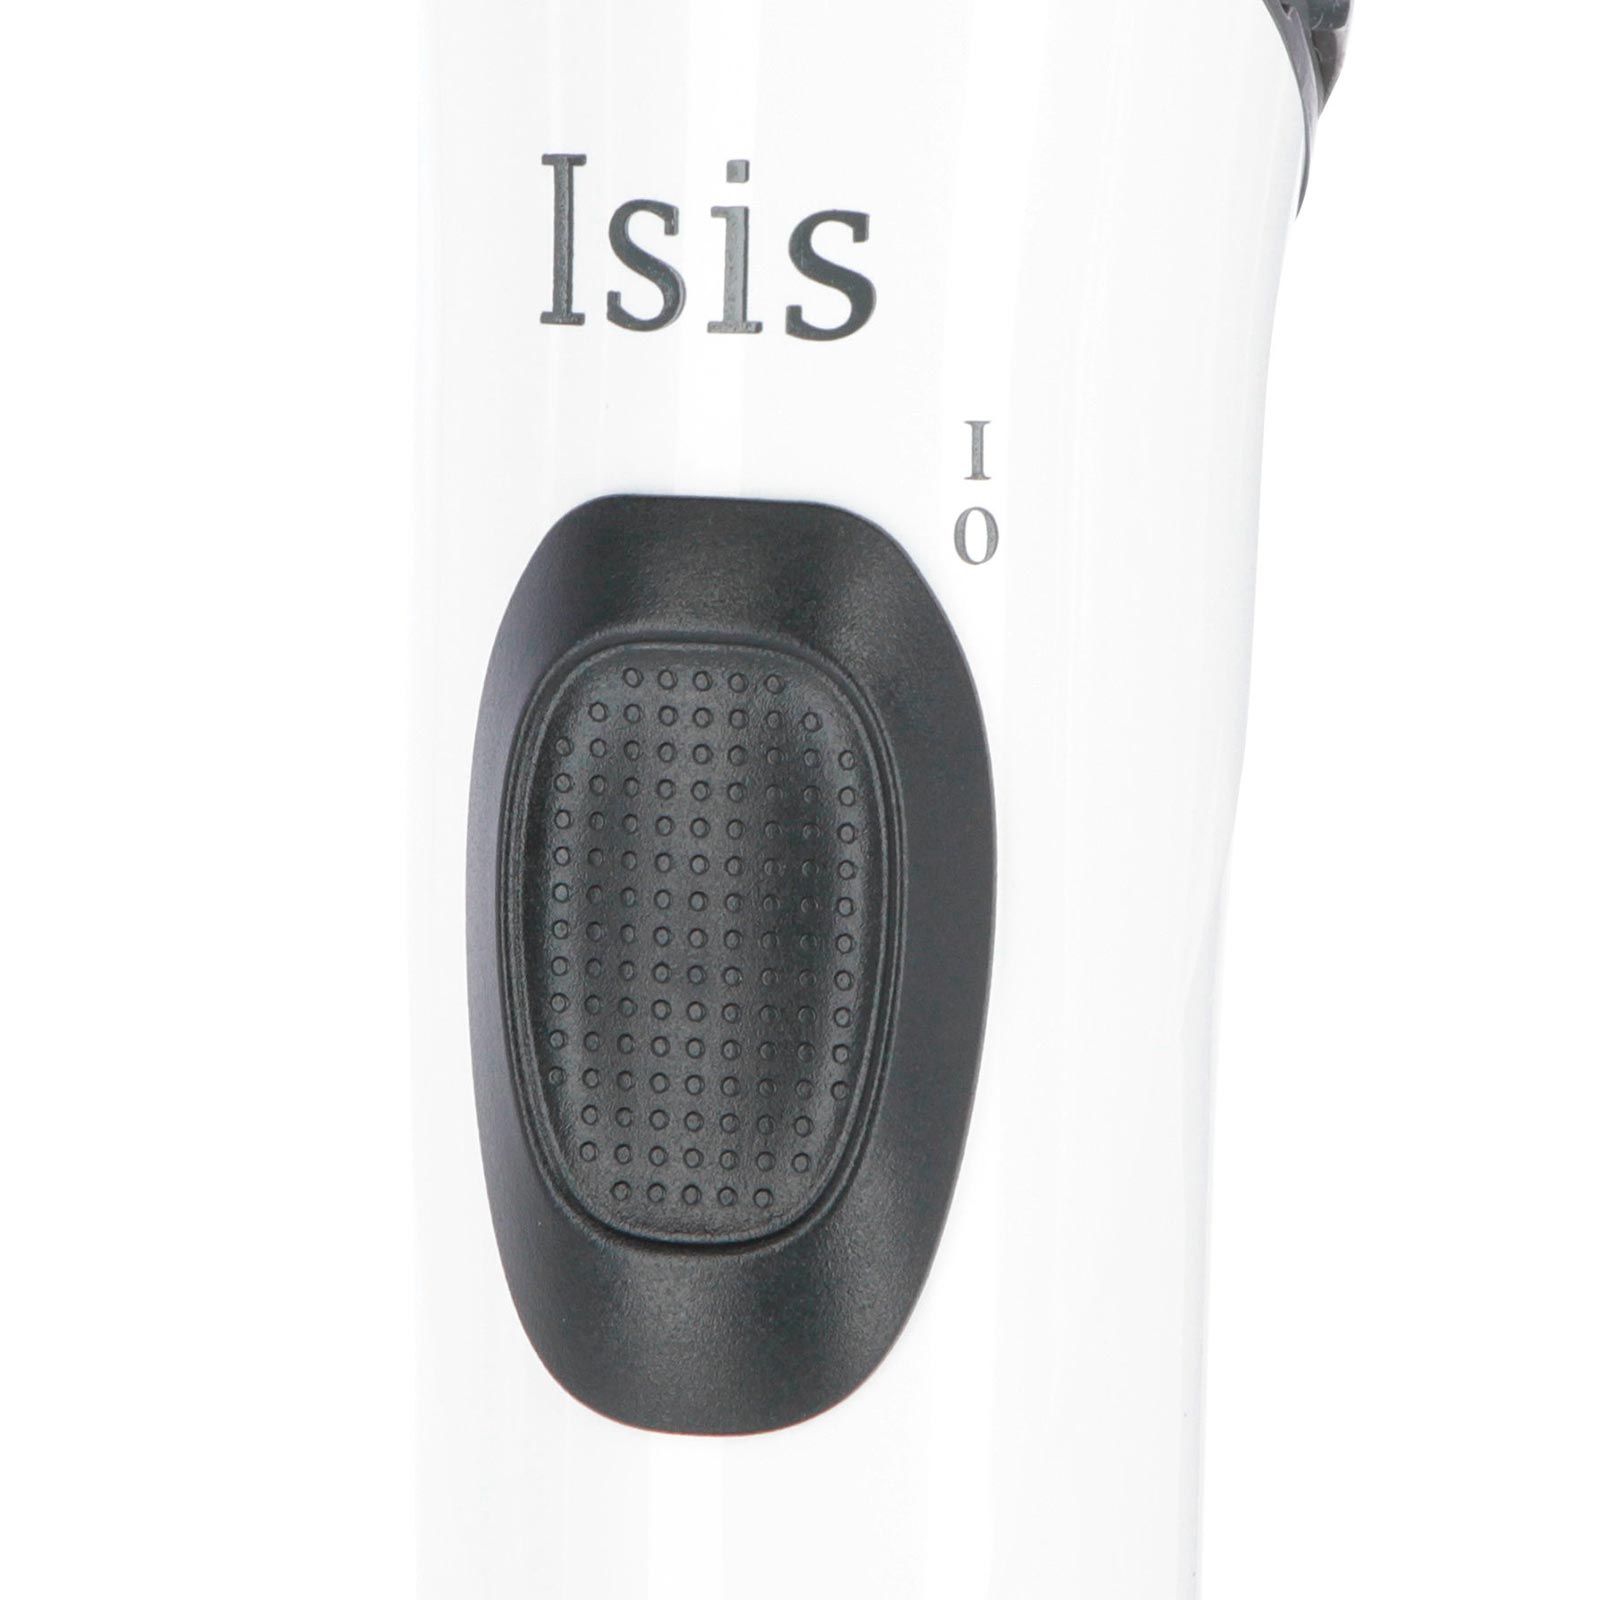 Aesculap Isis Clipper battery